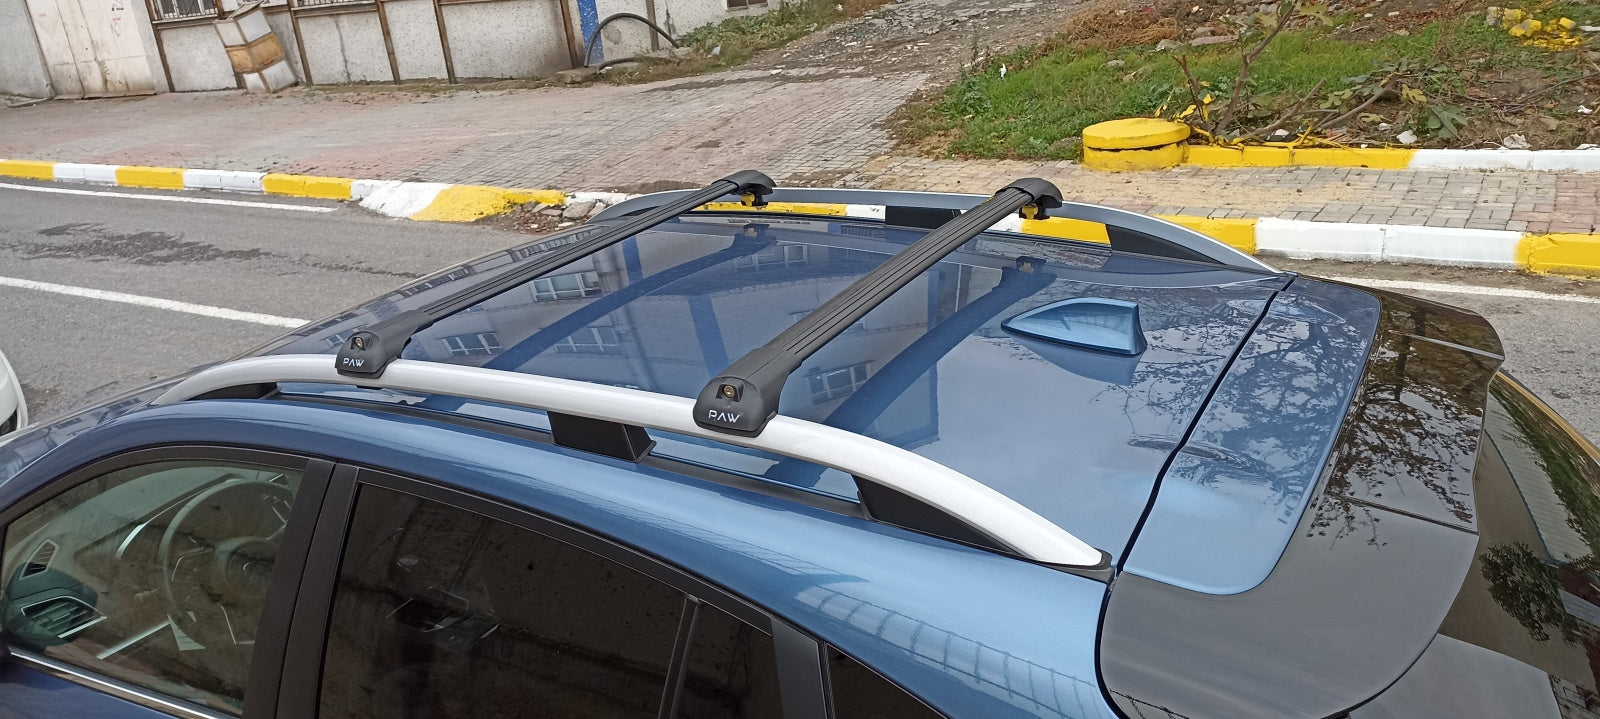 For Opel&Vauxhall Frontera 1999-2004 Roof Rack System Carrier Cross Bars Aluminum Lockable High Quality of Metal Bracket Black